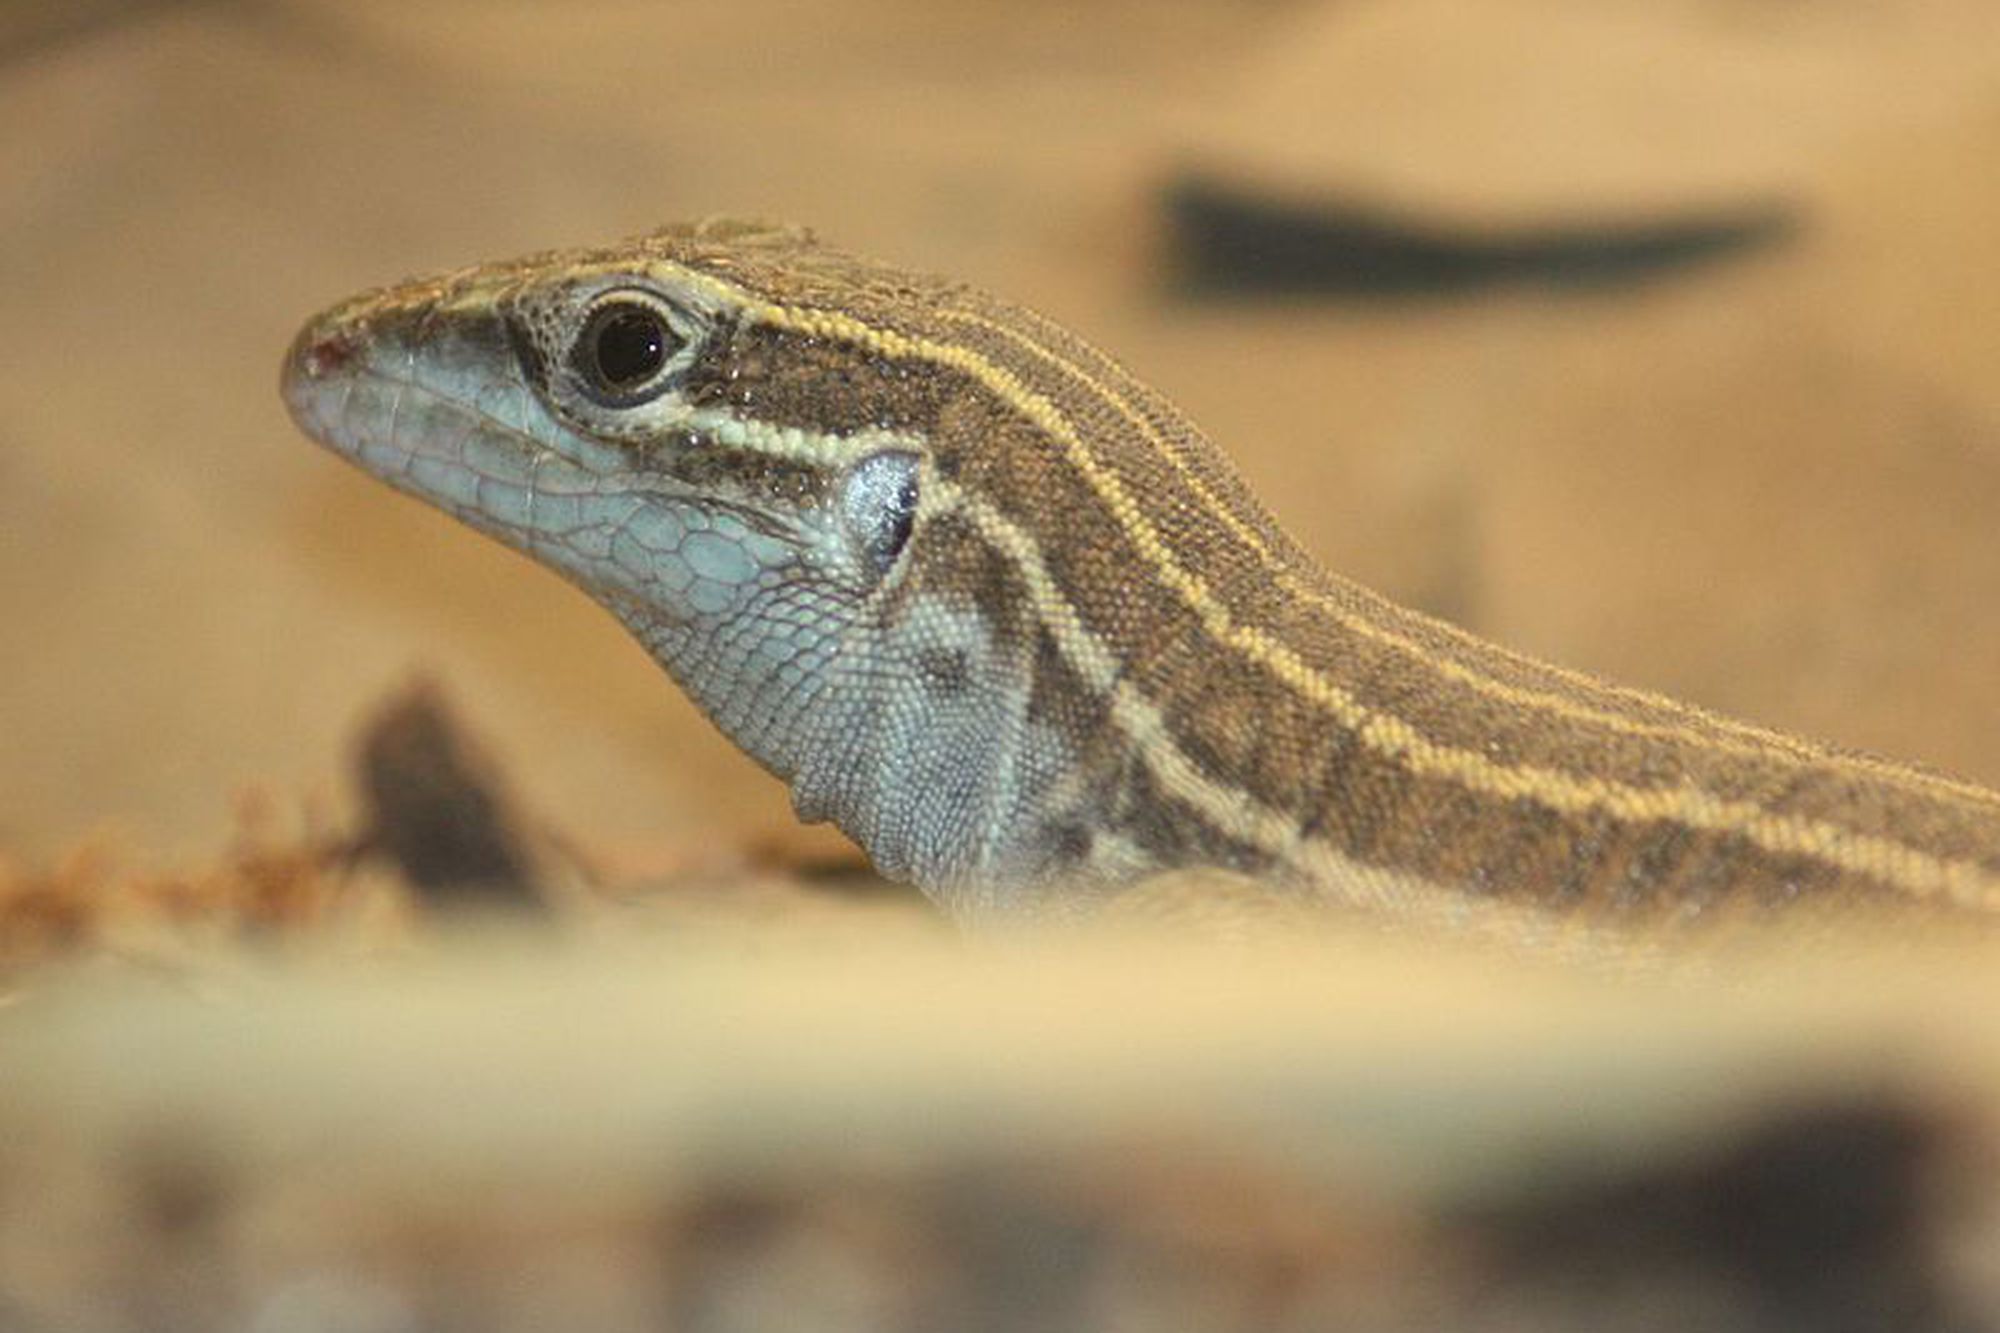 The Verge Review of Animals: the all-female whiptail lizard - The Verge